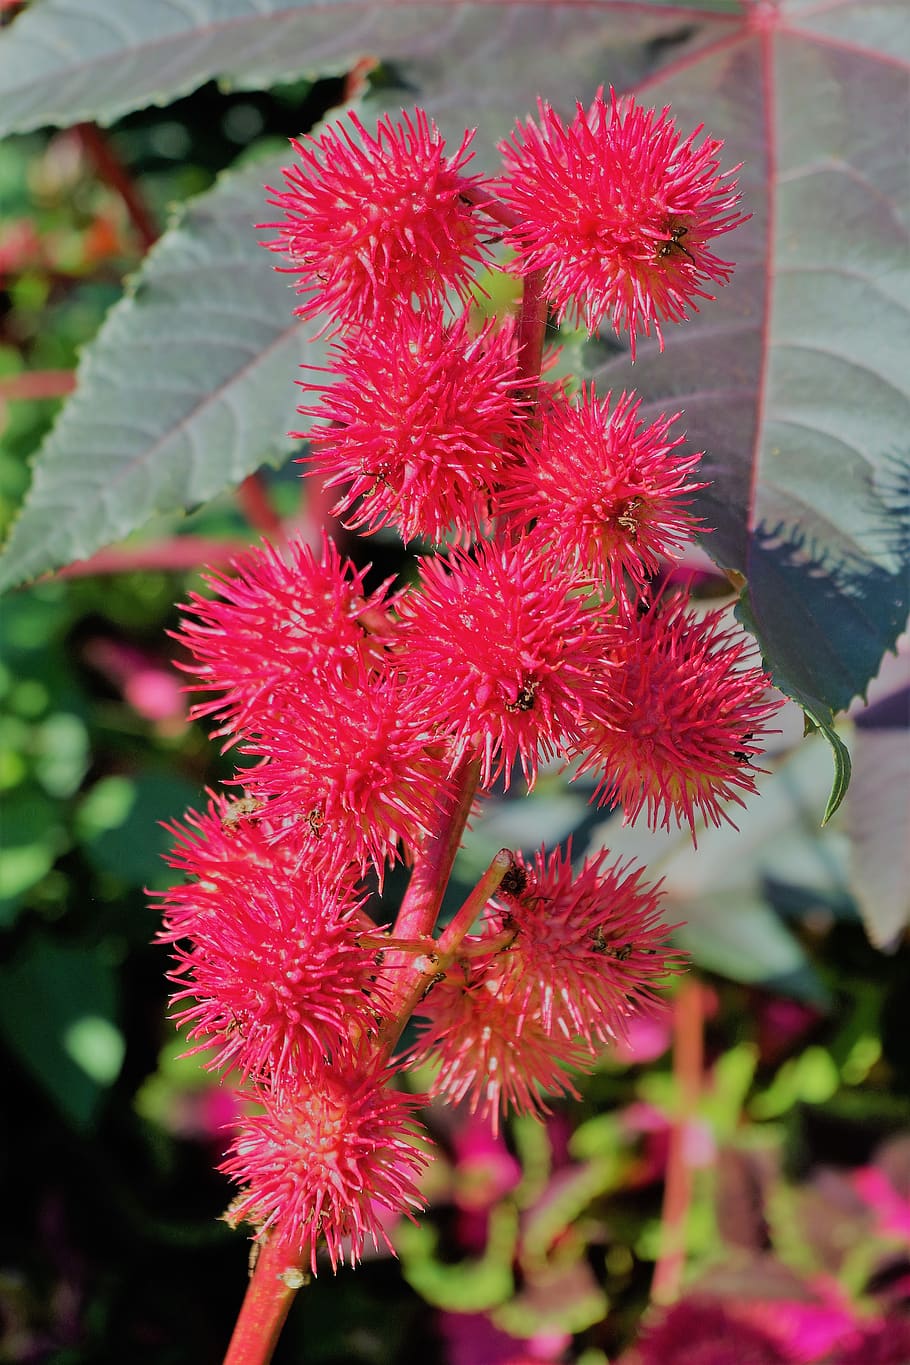 castor oil plant, wonder tree, toxic, red, seeds, ornamental plant, poisonous plant, spurge family, blossom, bloom